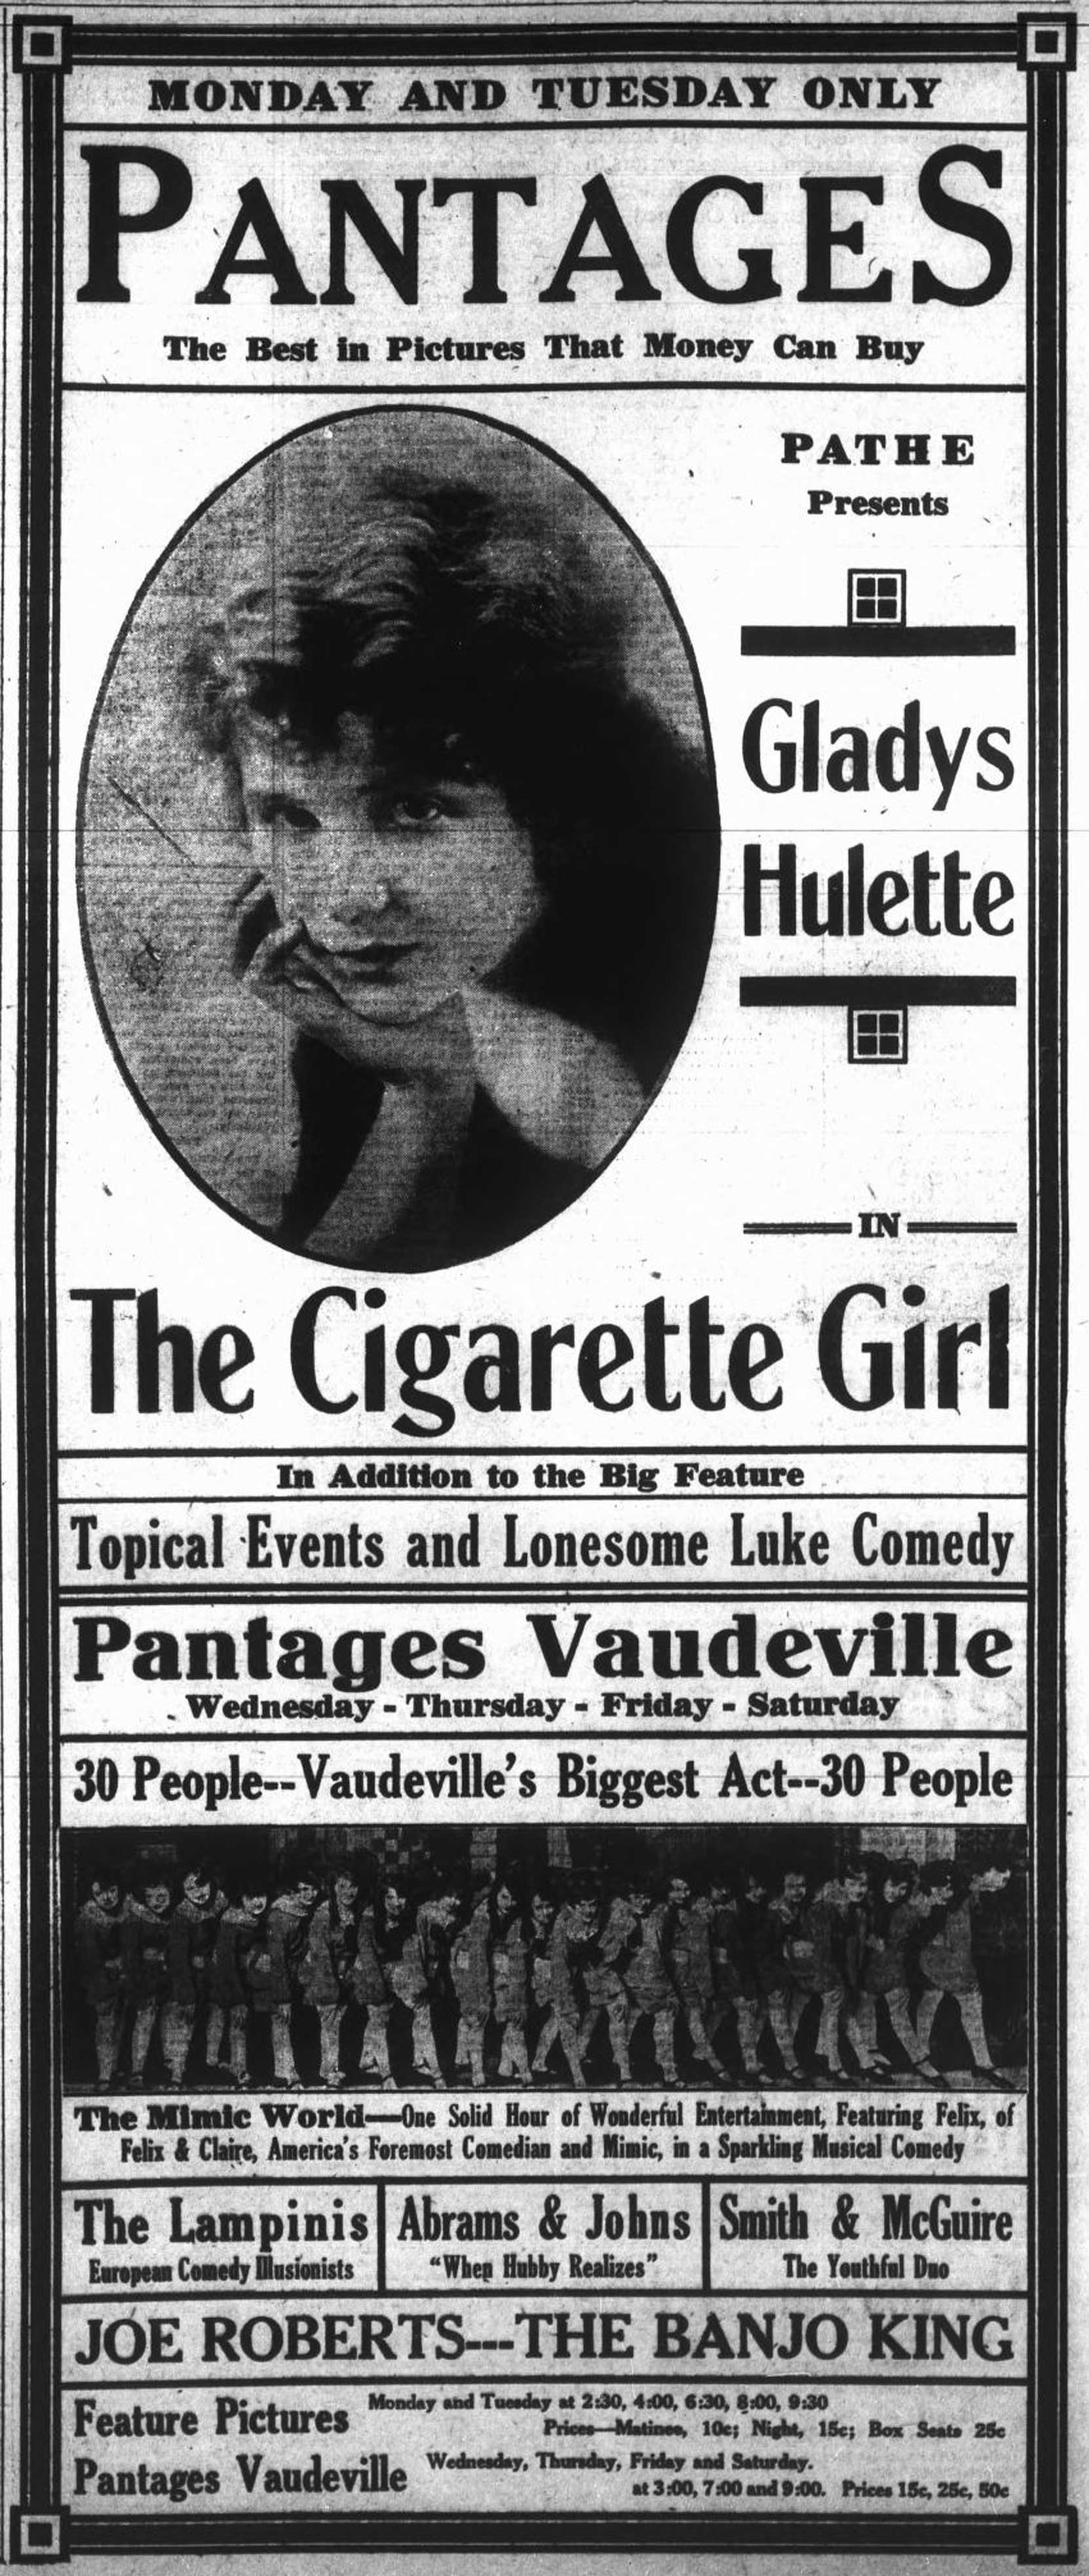 Advertisement for the Pantages Theater movie and vaudeville features, August 1917 (Victoria Online Sightseeing)